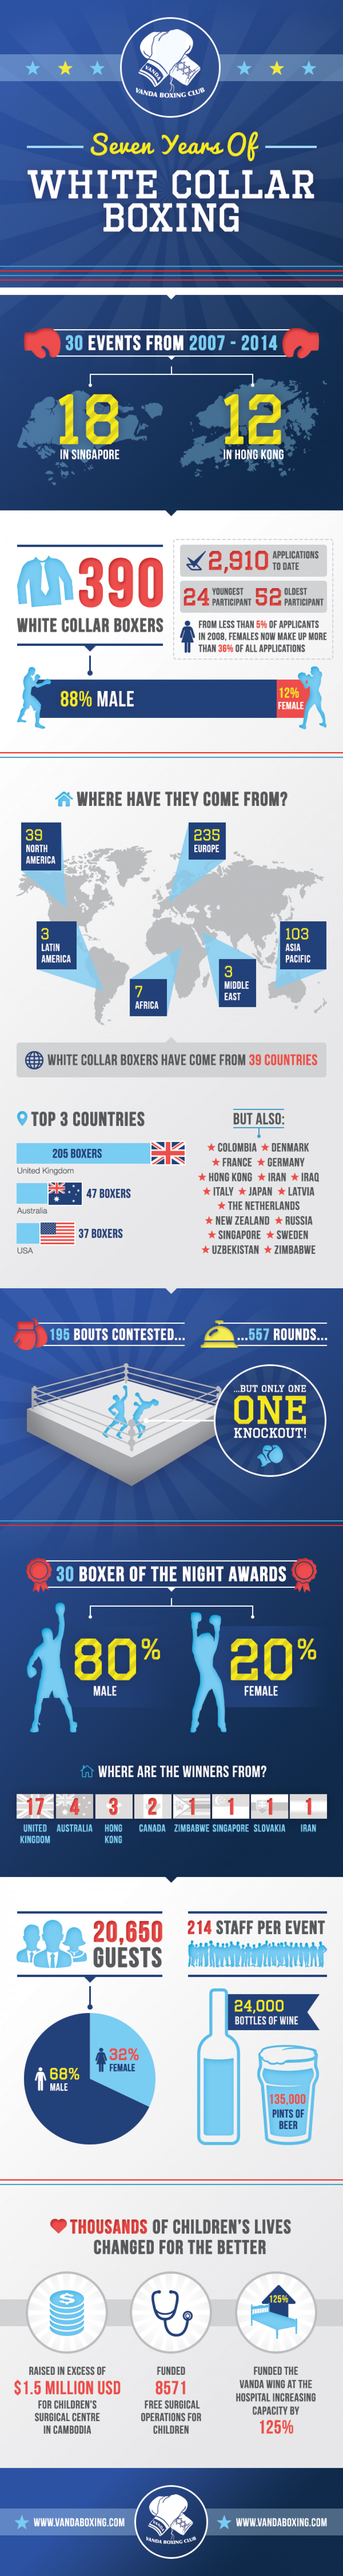 Seven Years of White Collar Boxing Infographic